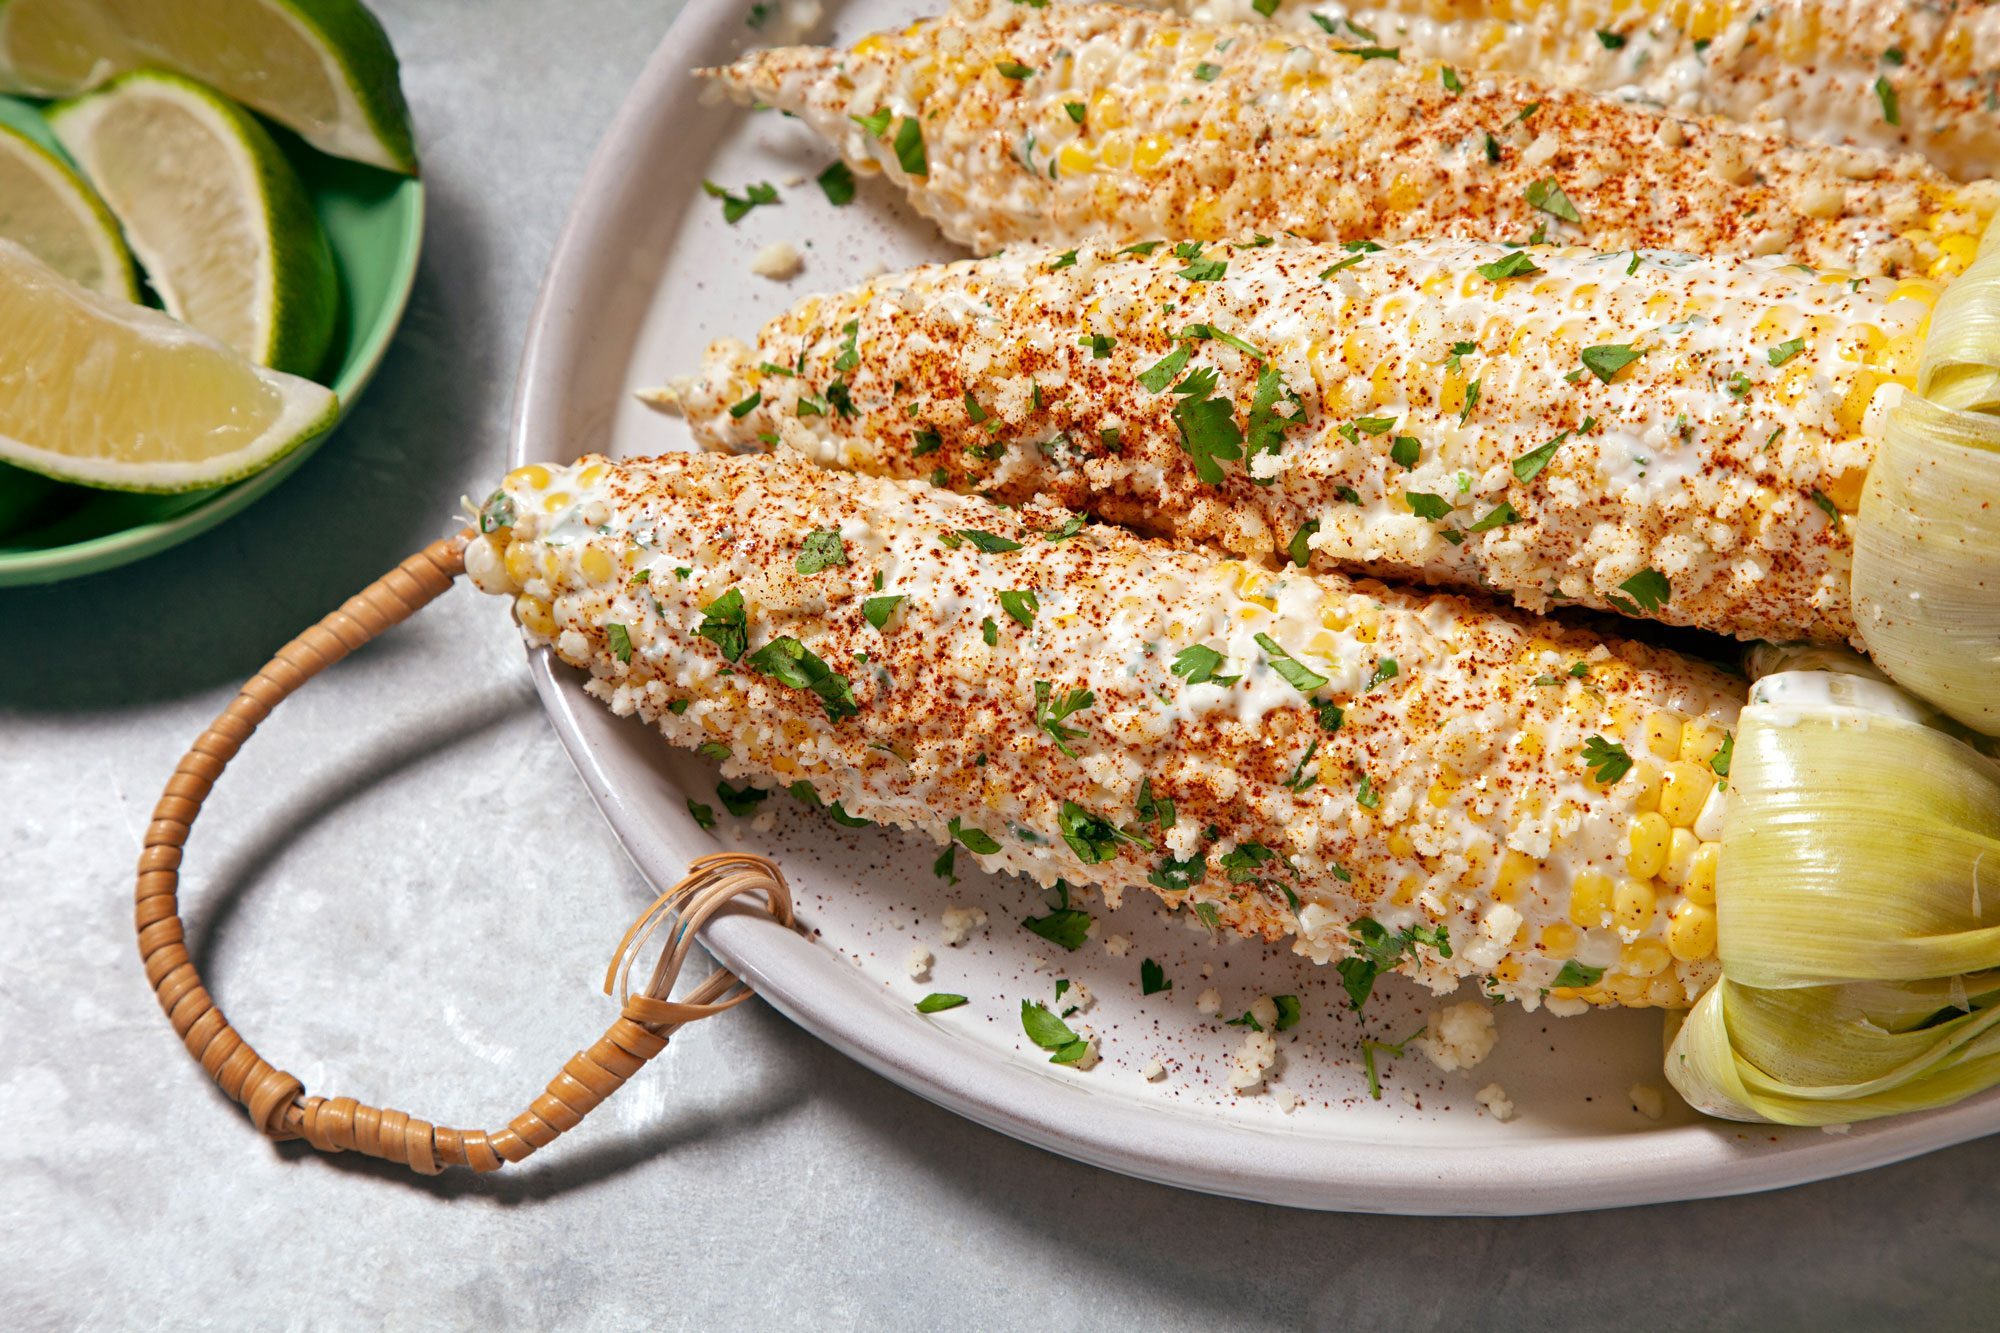 Mexican Street Corn served on large platter with lemon wedges in a small bowl